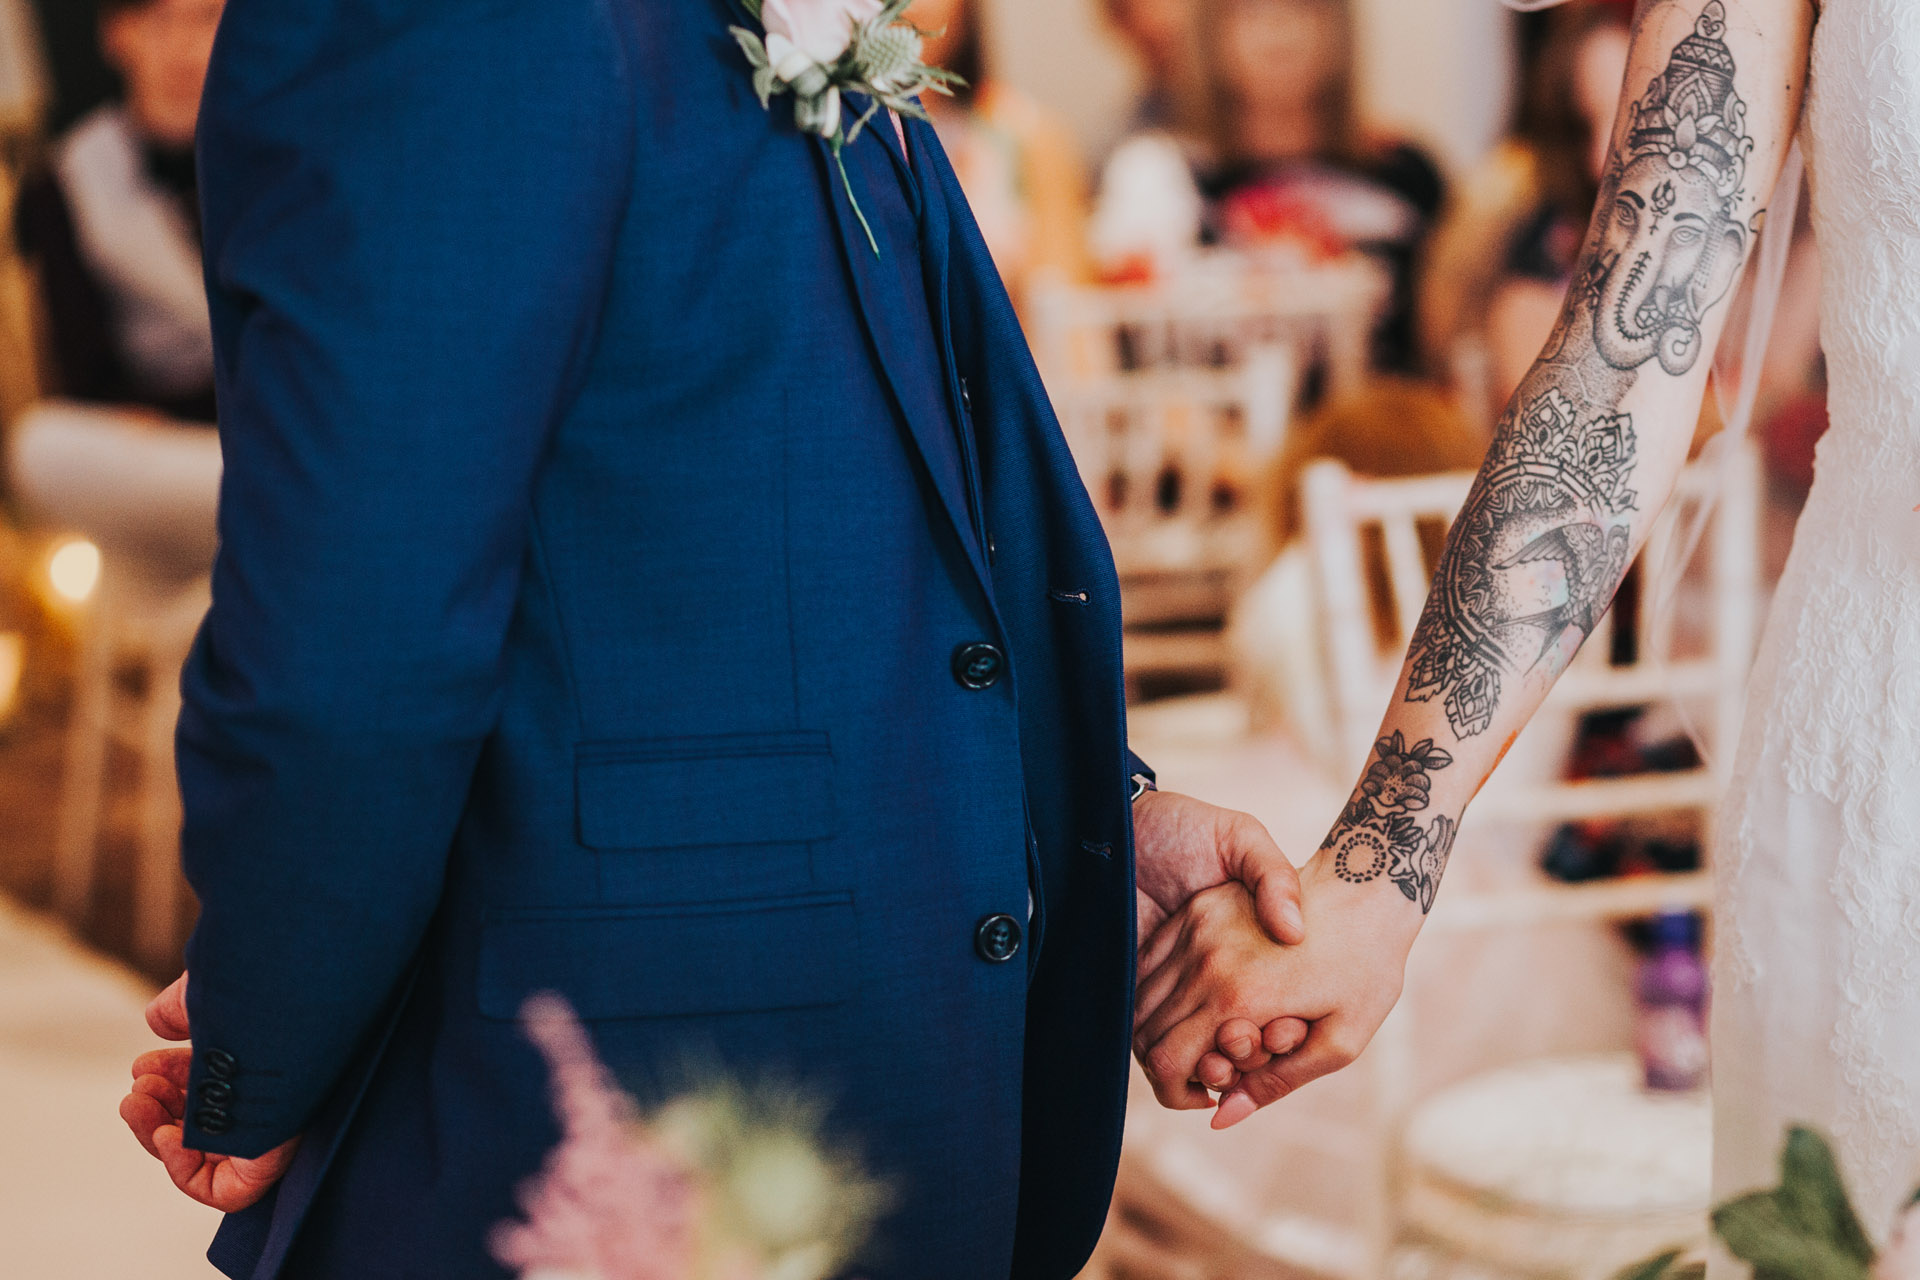 Brides beautiful tattooed arm stretches out to hold grooms hand. Close up photograph. 